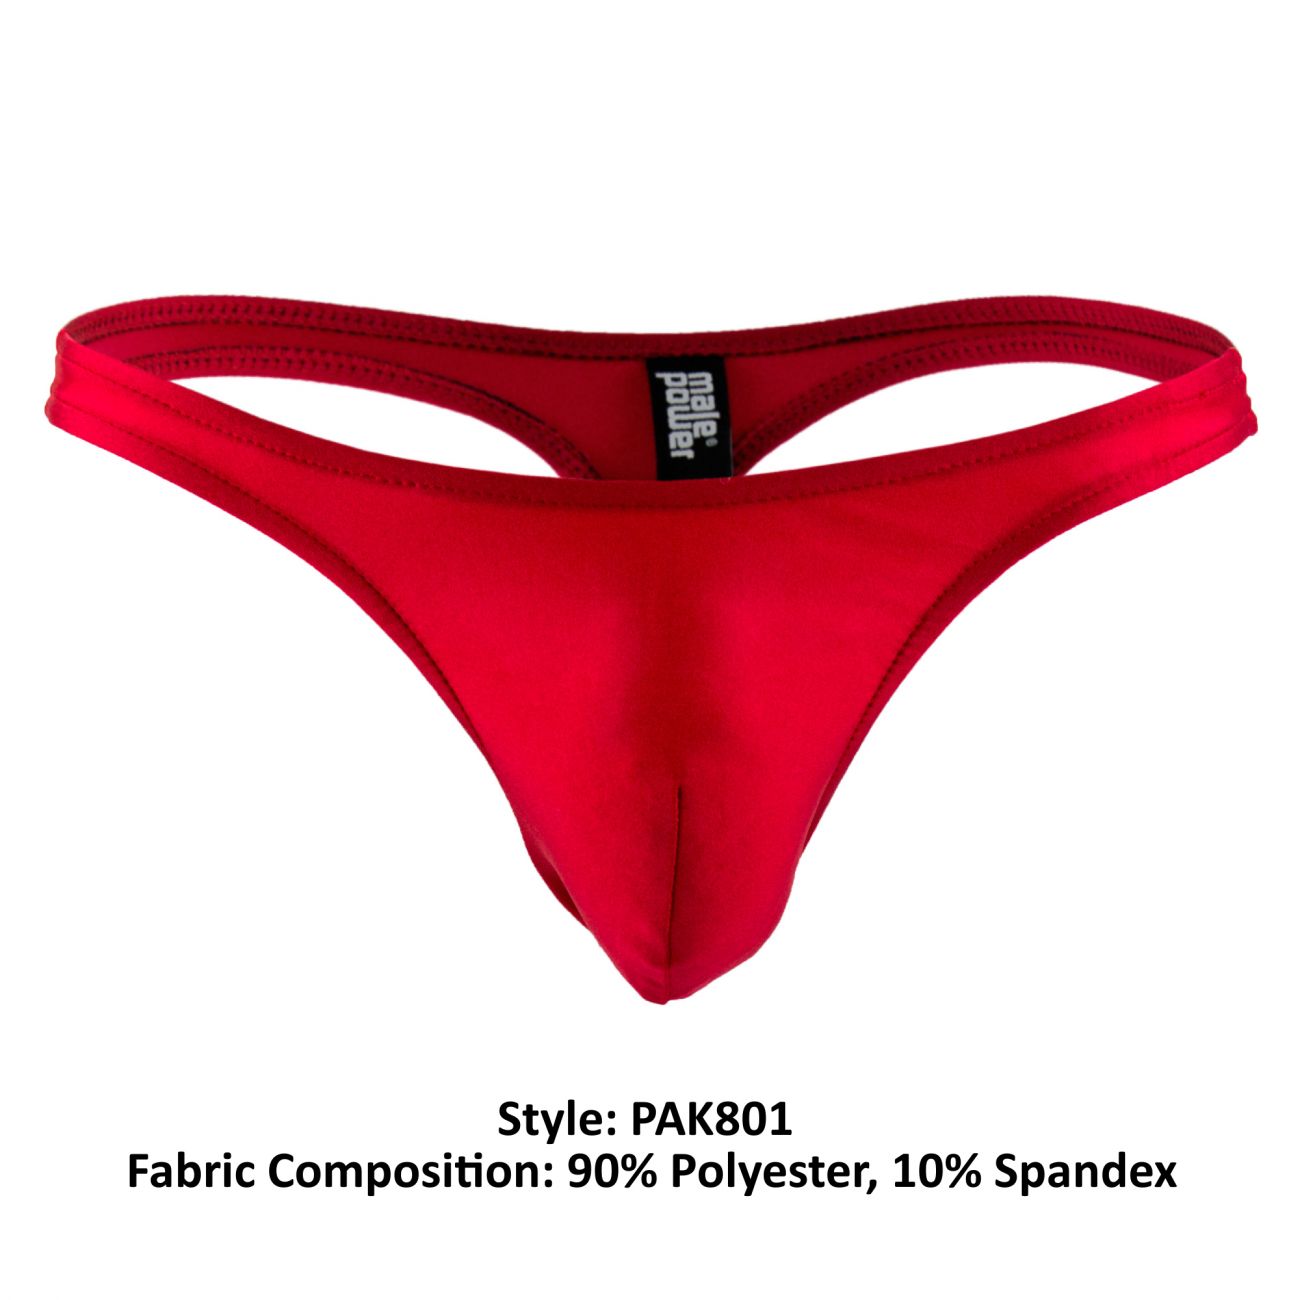 Male Power PAK801 Sexy Thong Red